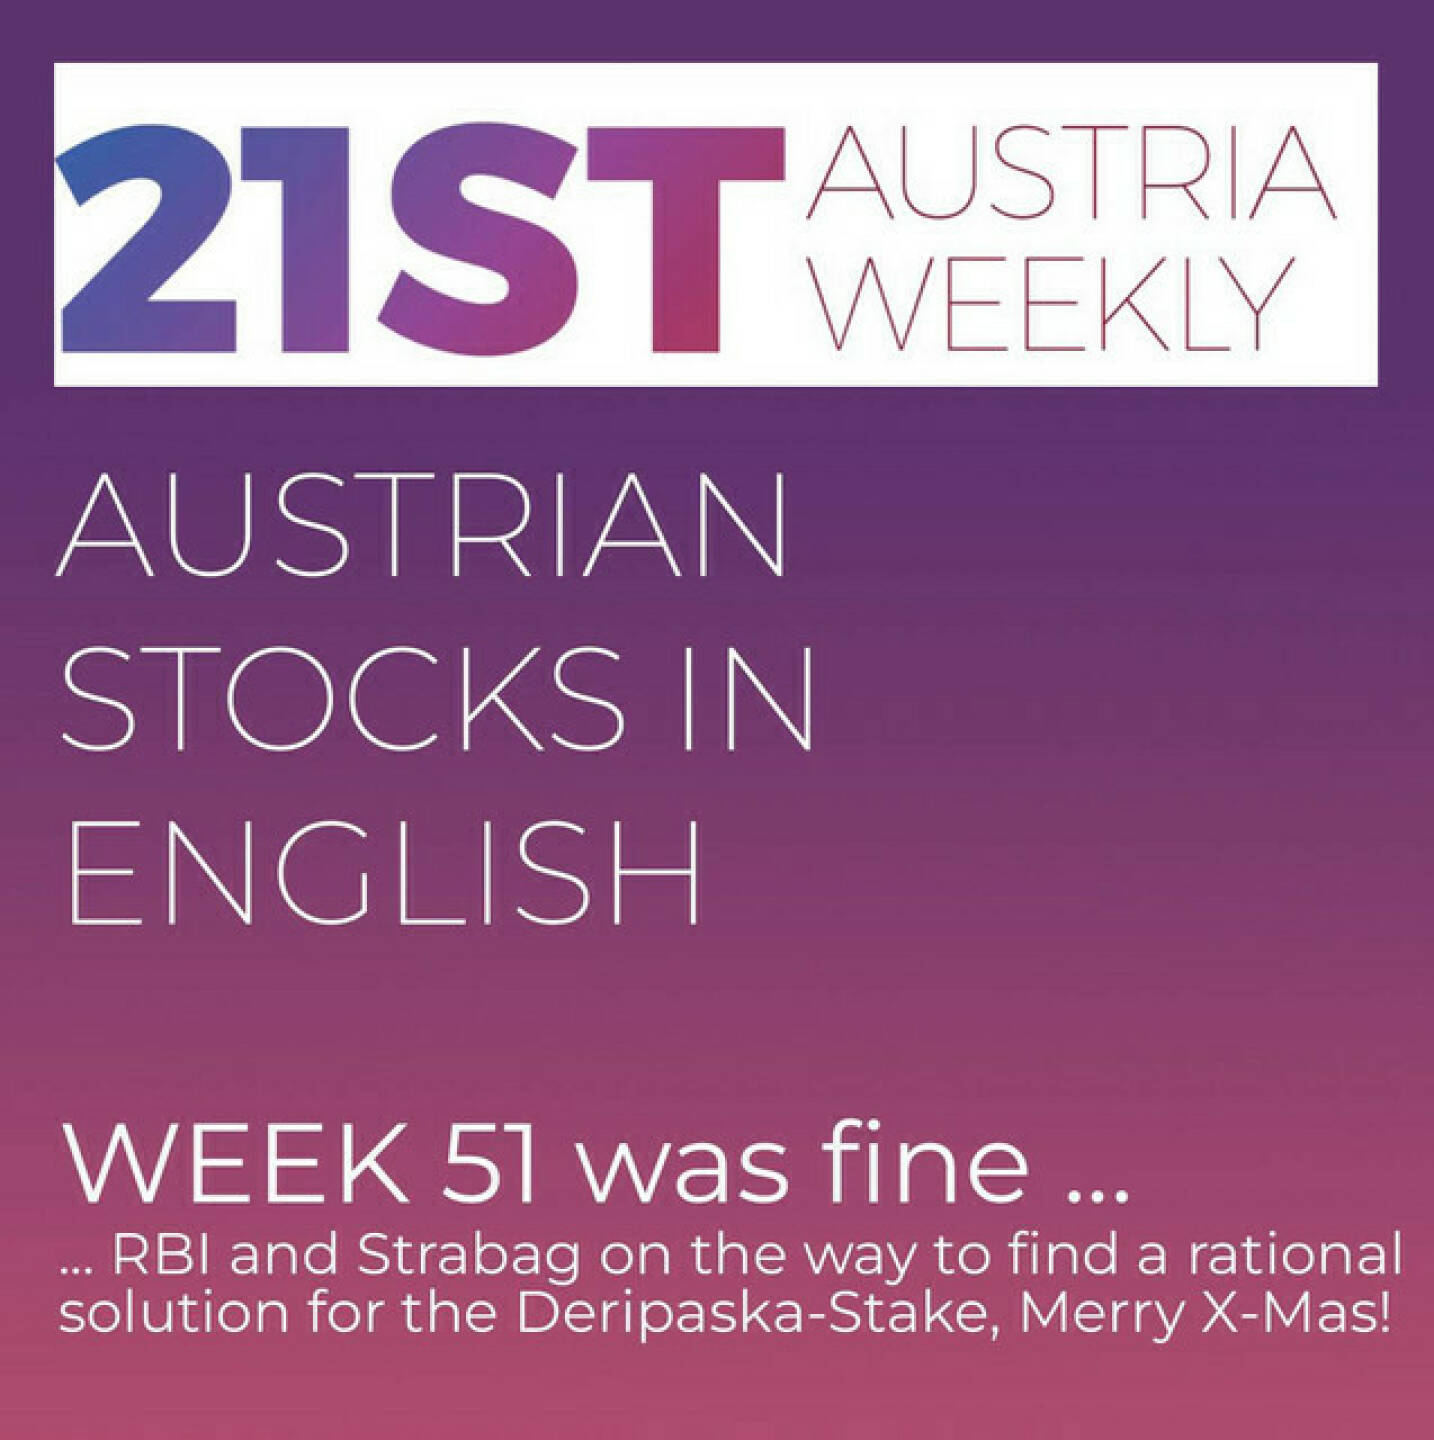 https://open.spotify.com/episode/3U5XmDxJsOJ0BMapnAUusQ
Austrian Stocks in English: Fine Week 51, RBI and Strabag on the way to find a rational solution for the Deripaska-Stake, Merry X-Mas! - <p>Welcome  to &#34;Austrian Stocks in English - presented by Palfinger&#34;, the english spoken weekly Summary for the Austrian Stock Market,  positioned every Sunday in the mostly german languaged Podcast &#34;Audio-CD.at Indie Podcasts&#34;- Wiener Börse, Sport Musik und Mehr“ . <br/><br/>The following script is based on our 21st Austria weekly and Week 51 was again a good week for ATX TR, which climbed 1,08 percent. Topperformers RBI and Strabag are on the way to find a rational solution for the Deripaska-Stake in Strabag. Further news came from Marinomed, Austrian Post, UBM, Kapsch TrafficCom, Andritz, RBI, A1 Group, Valneva, Immofinanz and CA Immo, spoken by the absolutely smart Alison.<br/><br/>And Merry Christmas with our Last Christmas Version: <a href=https://open.spotify.com/episode/6ldFasL6rCiK2l5OOHyptL target=_blank>https://open.spotify.com/episode/6ldFasL6rCiK2l5OOHyptL</a>   <br/><br/><a href=https://boerse-social.com/21staustria target=_blank>https://boerse-social.com/21staustria</a><br/><br/><a href=https://www.audio-cd.at/search/austrian%20stocks%20in%20english target=_blank>https://www.audio-cd.at/search/austrian%20stocks%20in%20english</a><br/><br/>30x30 Finanzwissen pur für Österreich auf Spotify spoken by Alison:: <a href=https://open.spotify.com/playlist/3MfSMoCXAJMdQGwjpjgmLm target=_blank>https://open.spotify.com/playlist/3MfSMoCXAJMdQGwjpjgmLm</a><br/><br/>Please rate my Podcast on Apple Podcasts (or Spotify): <a href=https://podcasts.apple.com/at/podcast/audio-cd-at-indie-podcasts-wiener-boerse-sport-musik-und-mehr/id1484919130 target=_blank>https://podcasts.apple.com/at/podcast/audio-cd-at-indie-podcasts-wiener-boerse-sport-musik-und-mehr/id1484919130</a> .And please spread the word : <a href=https://www.boerse-social.com/21staustria target=_blank>https://www.boerse-social.com/21staustria</a> - the address to subscribe to the weekly summary as a PDF.</p>